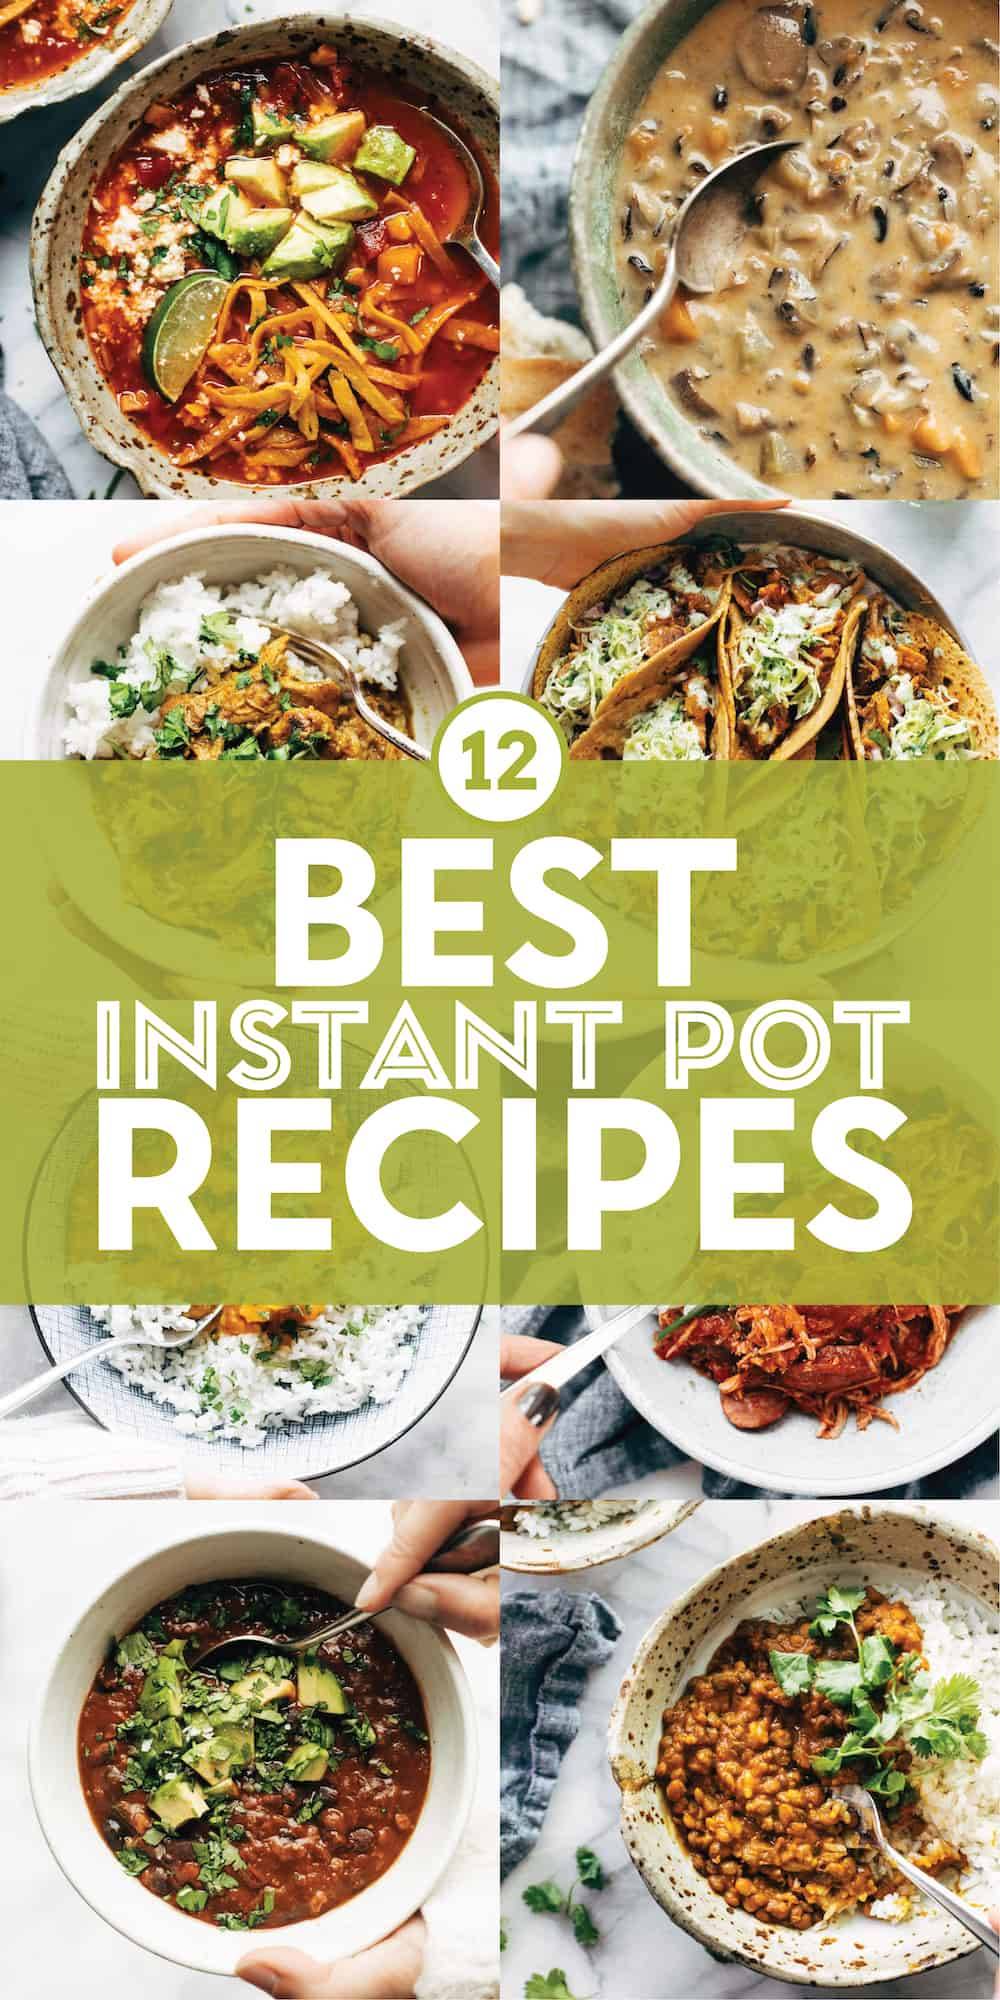 20 Magical Ways to Use Your Instant Pot - Pinch of Yum